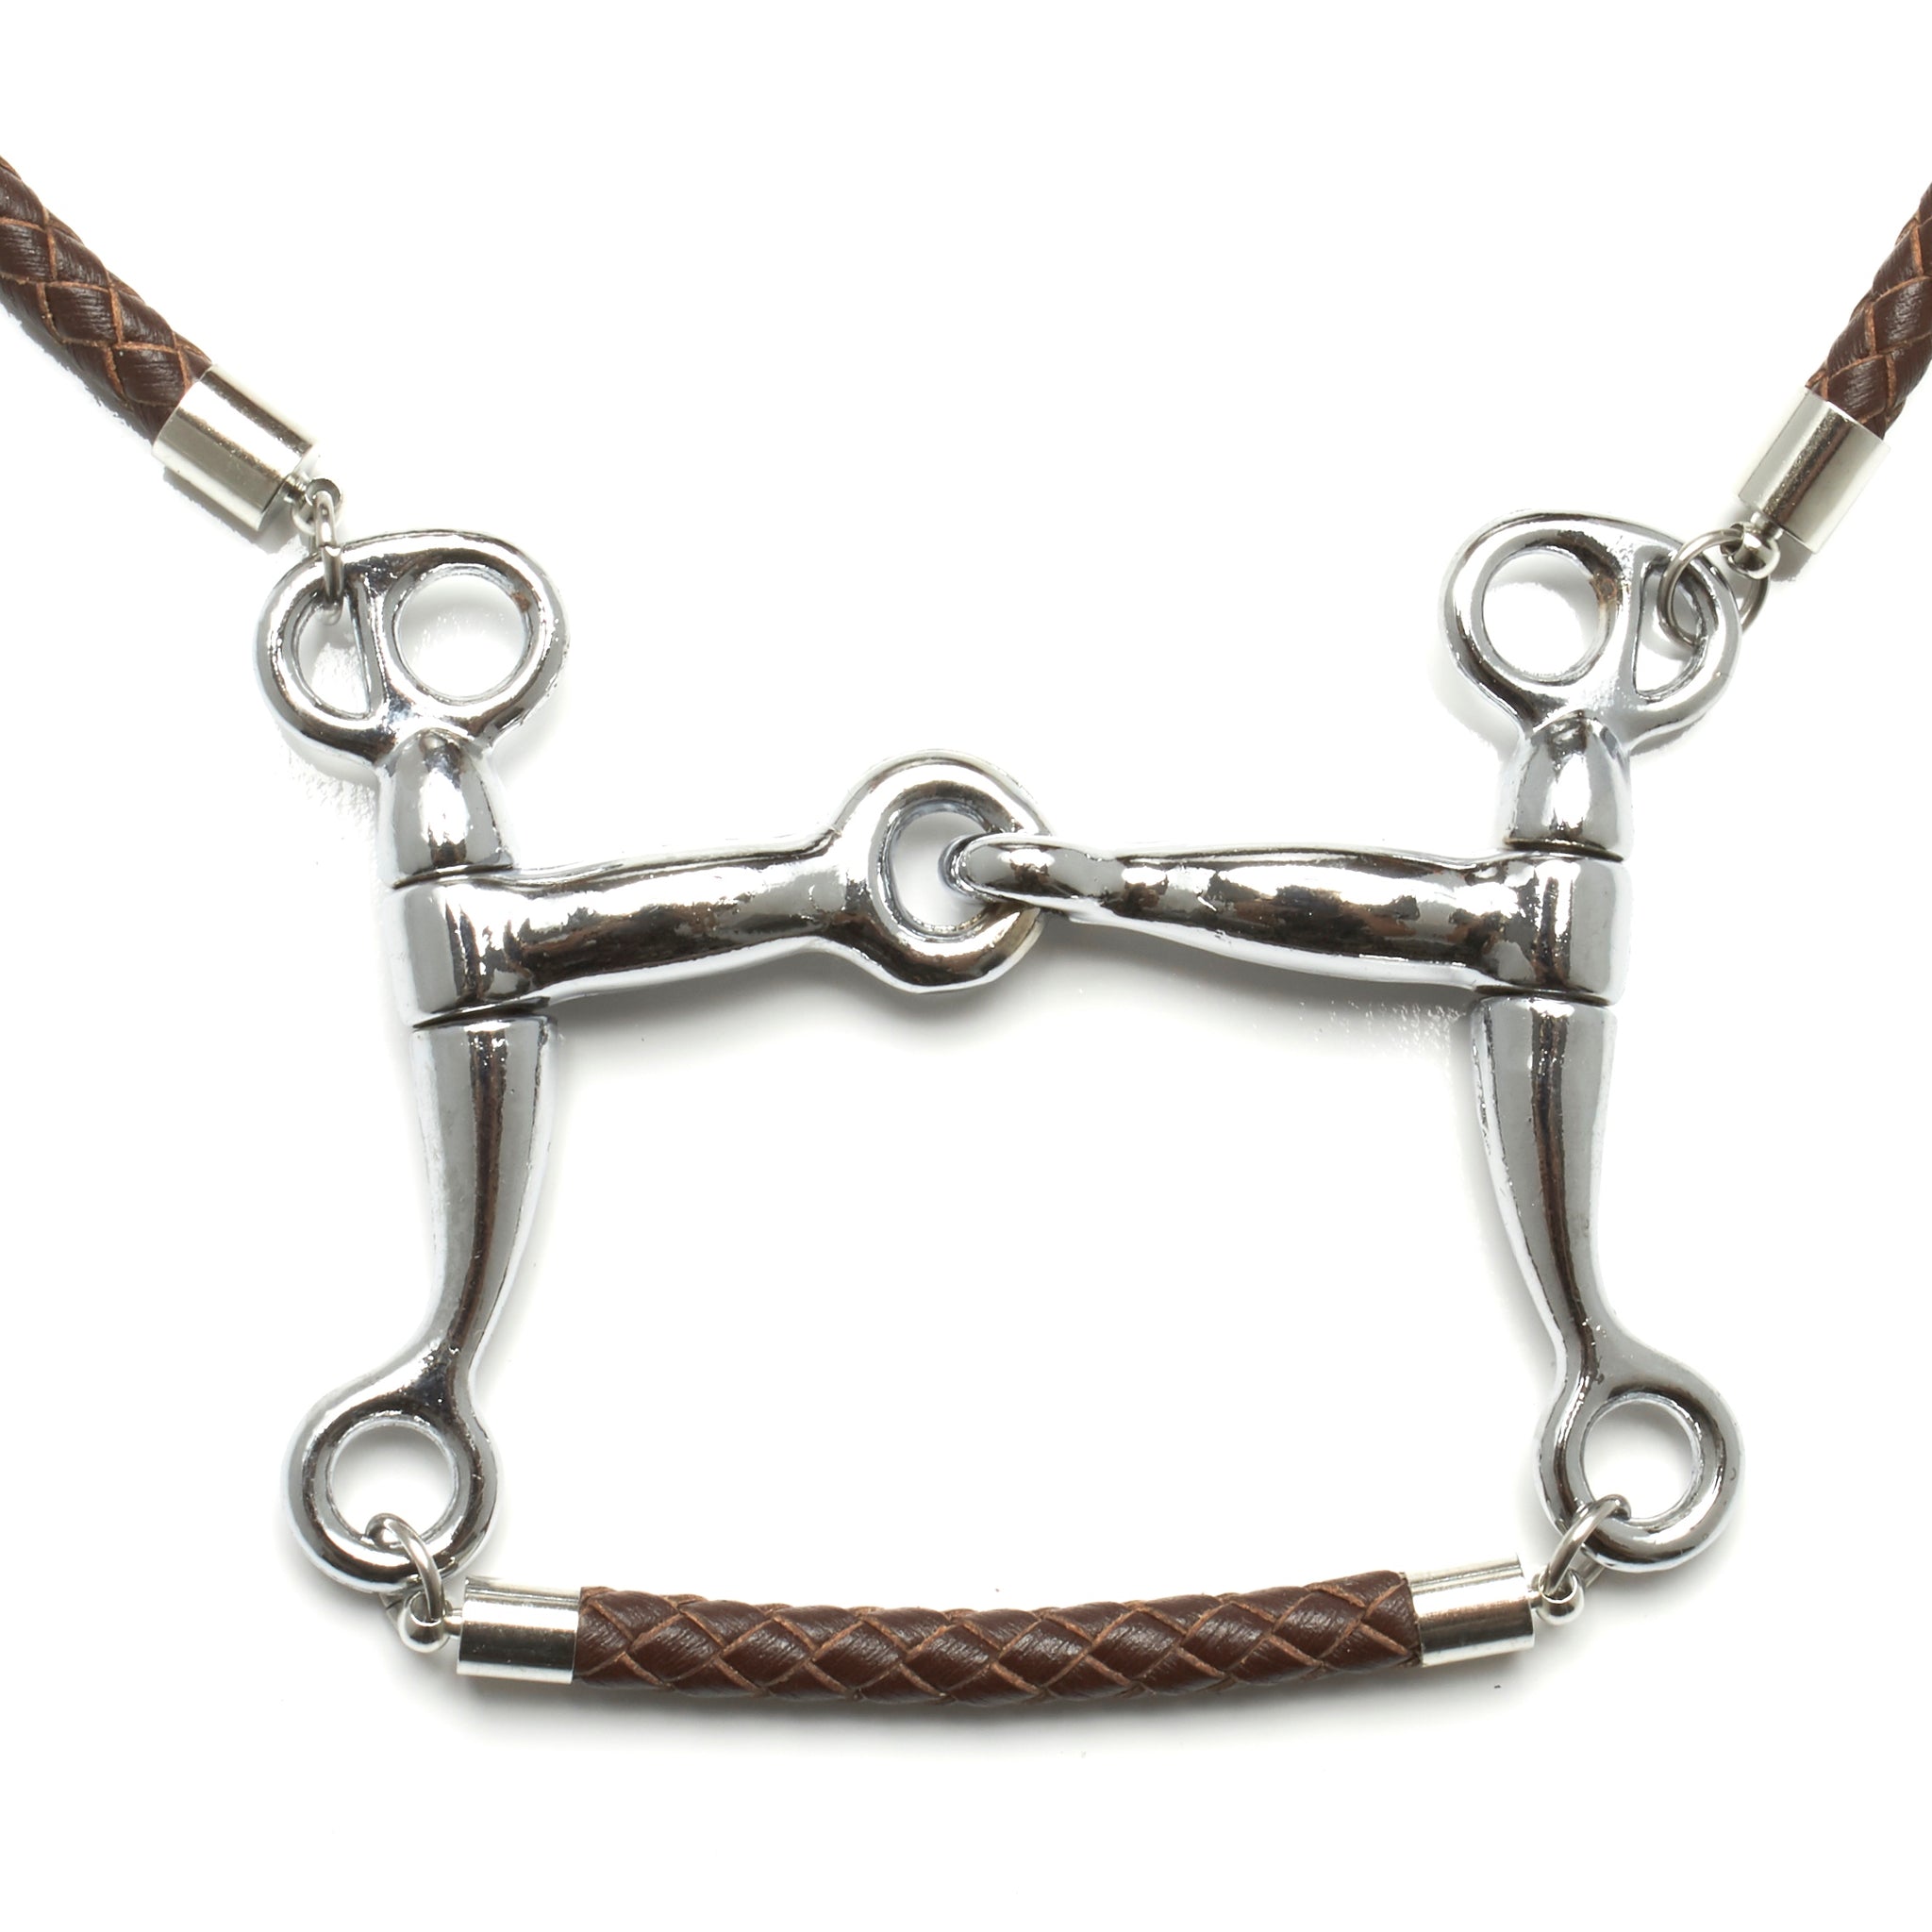 5 MM ROUND BRAIDED LEATHER NECKLACE WITH PELHAM HORSE BIT PENDANT AND LEATHER BAR by nyet jewelry